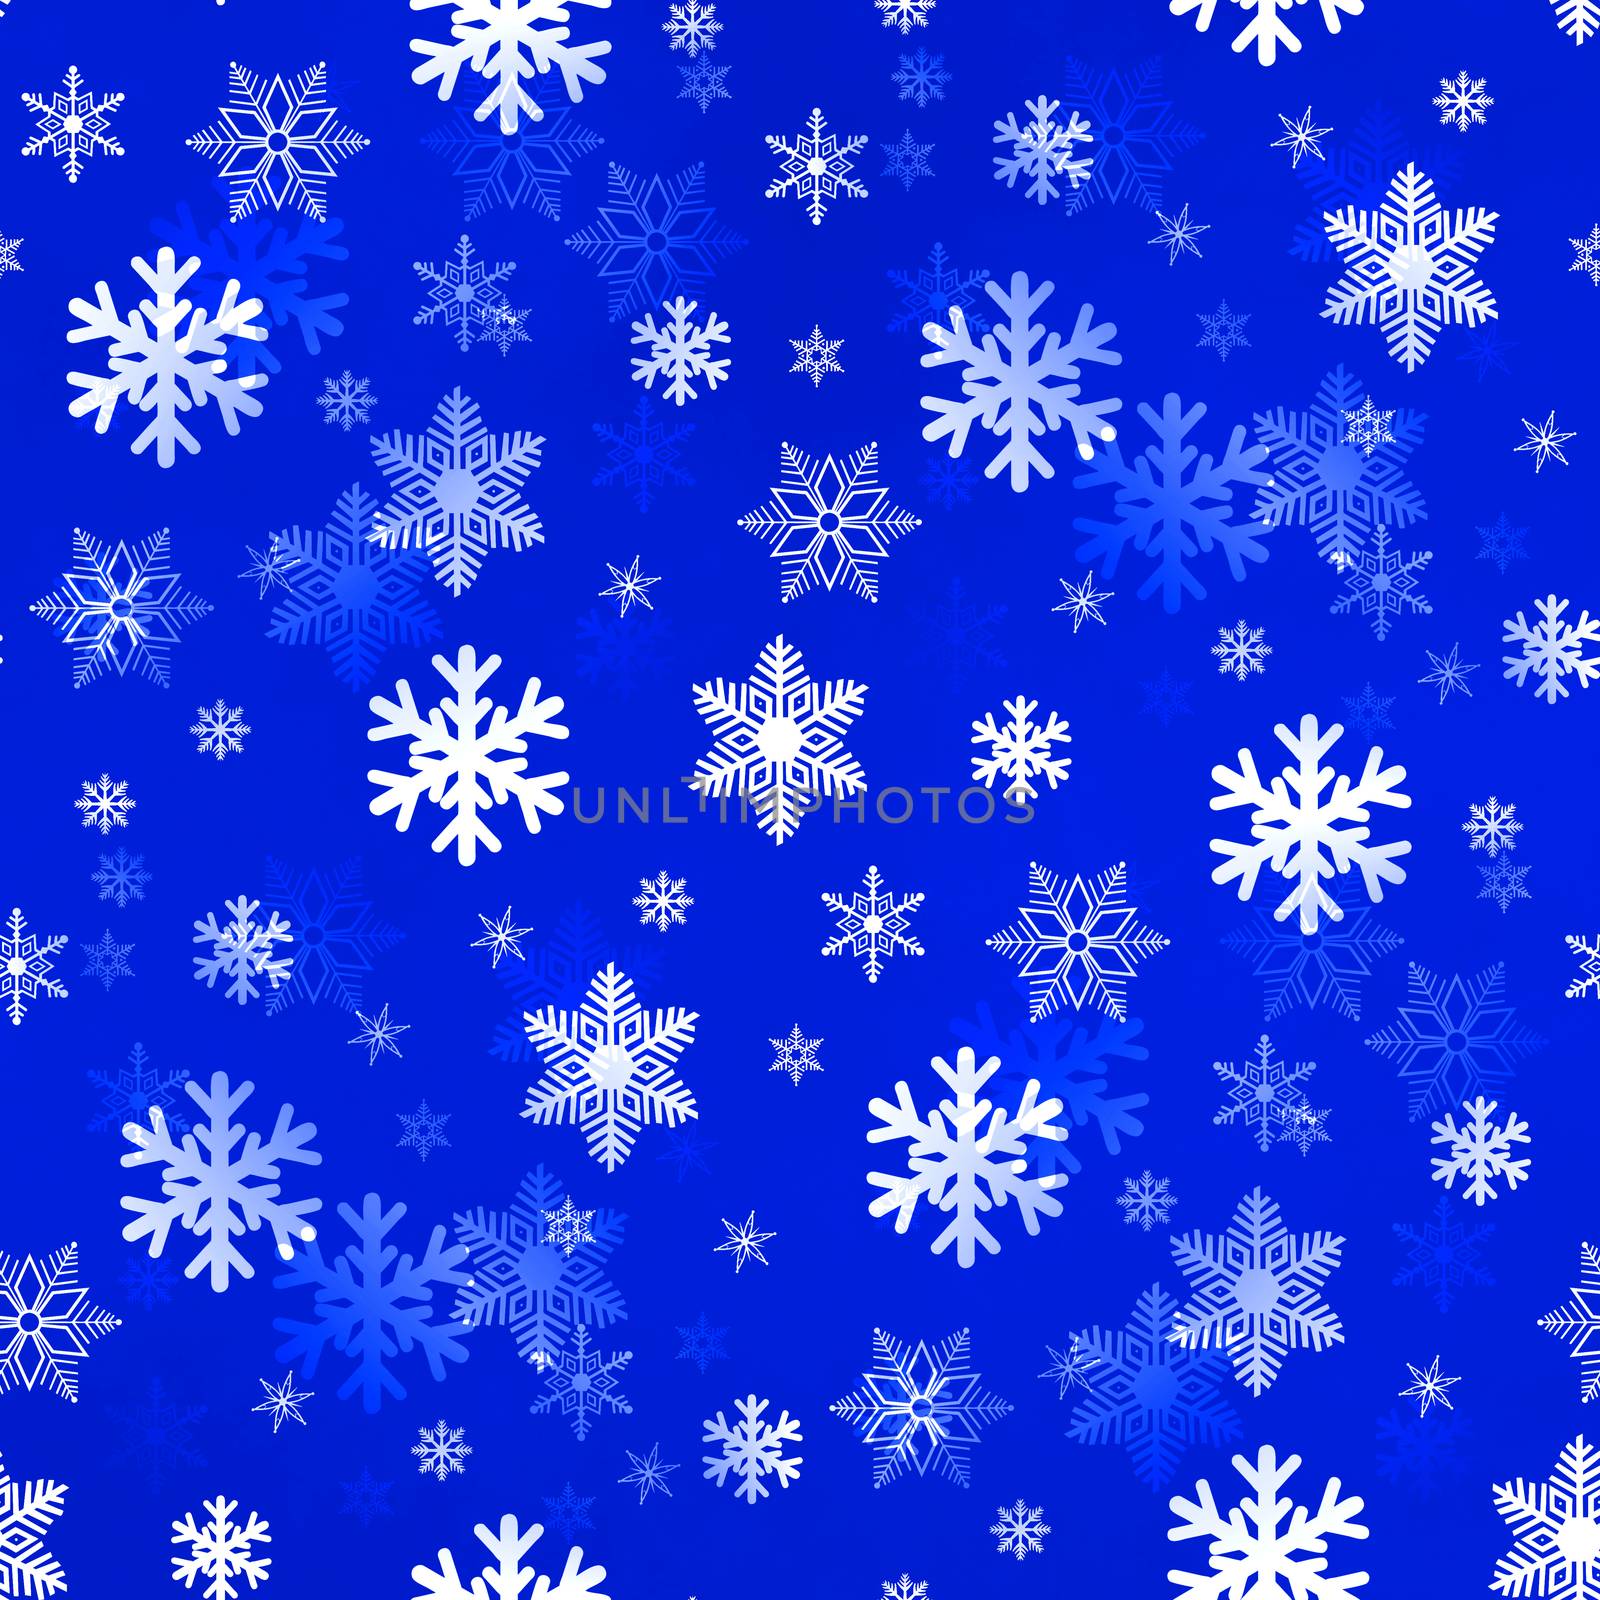 Light blue winter Christmas snowflakes with a seamless pattern as background image.